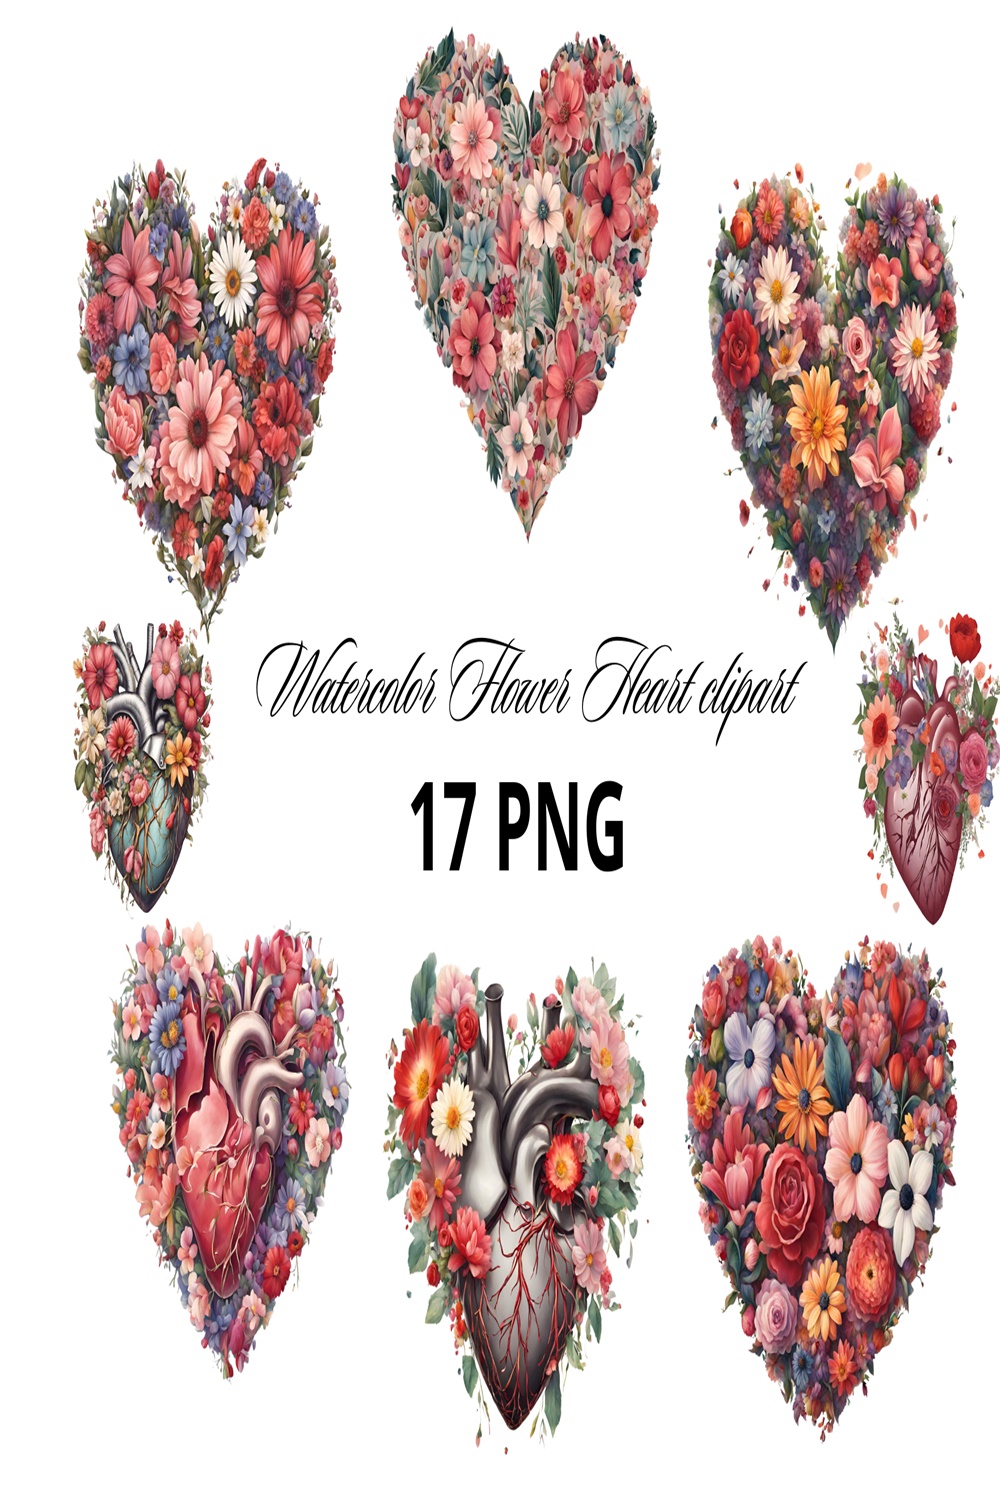 Watercolor Flower Heart clipart, Watercolor Valentine's heart, Valentine's Day PNG, Floral hearts png, Heart Flowers, 17 PNG, Commercial use pinterest preview image.